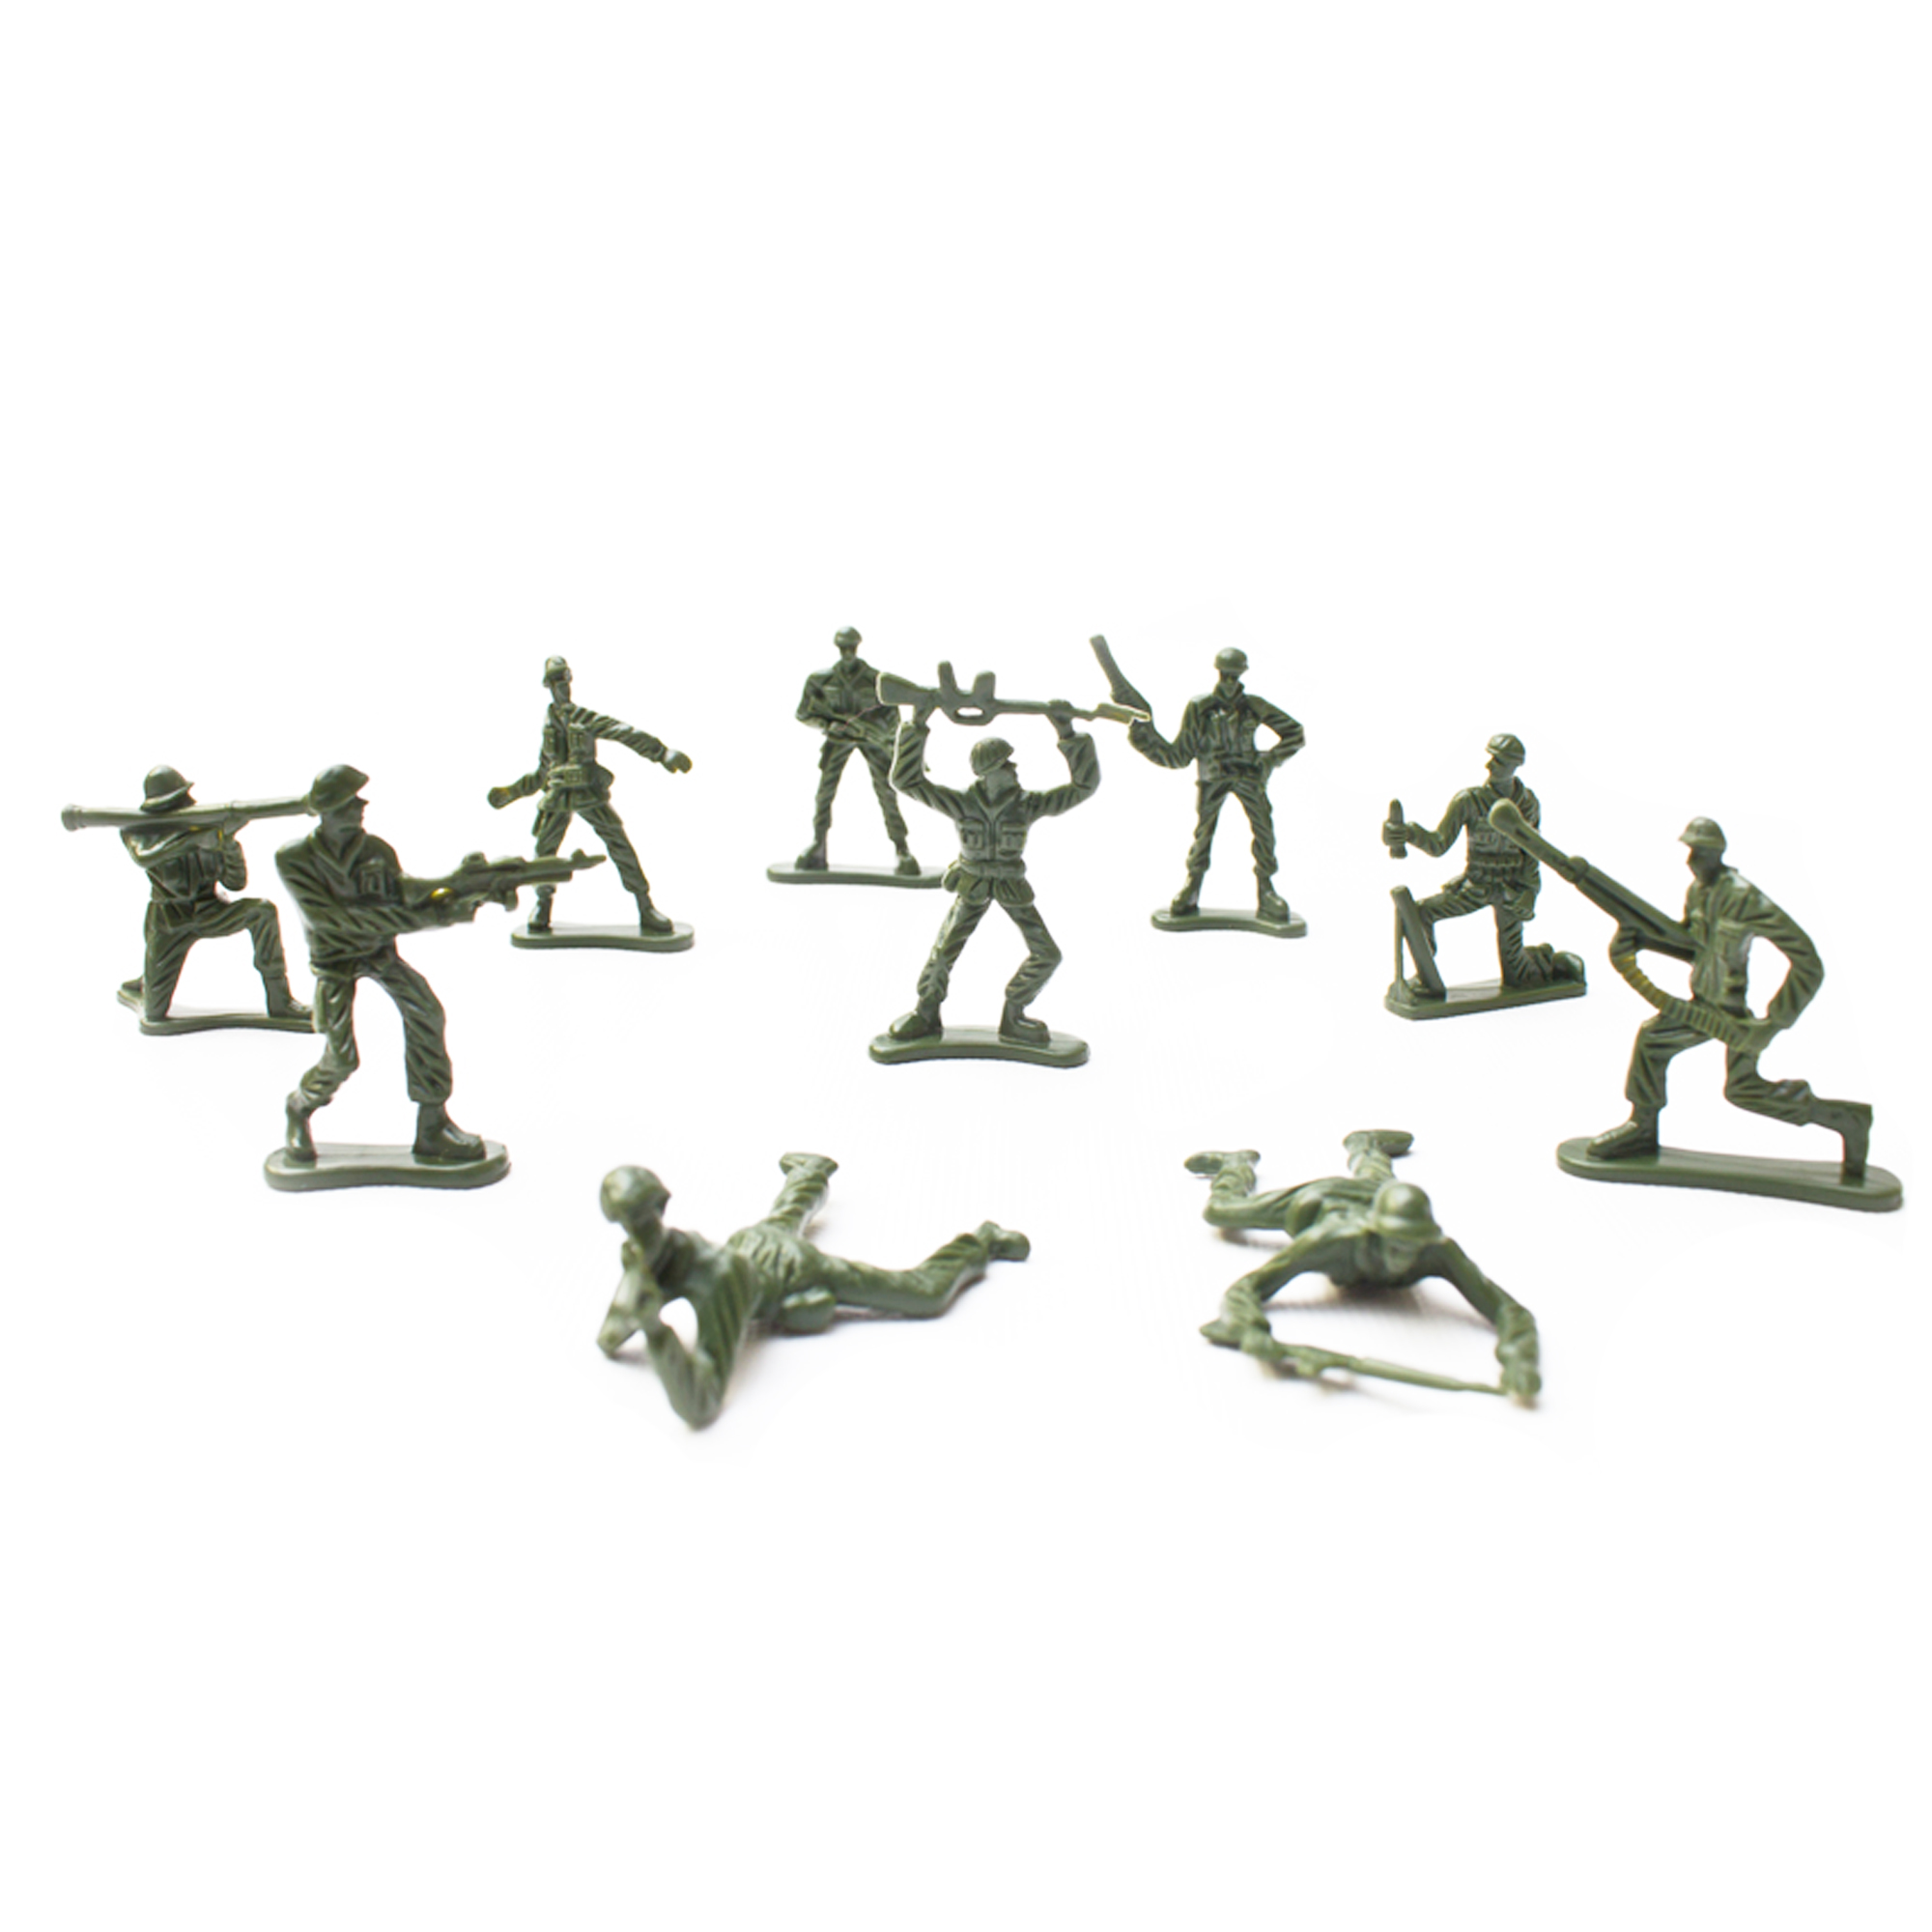 Army Toy Figurines